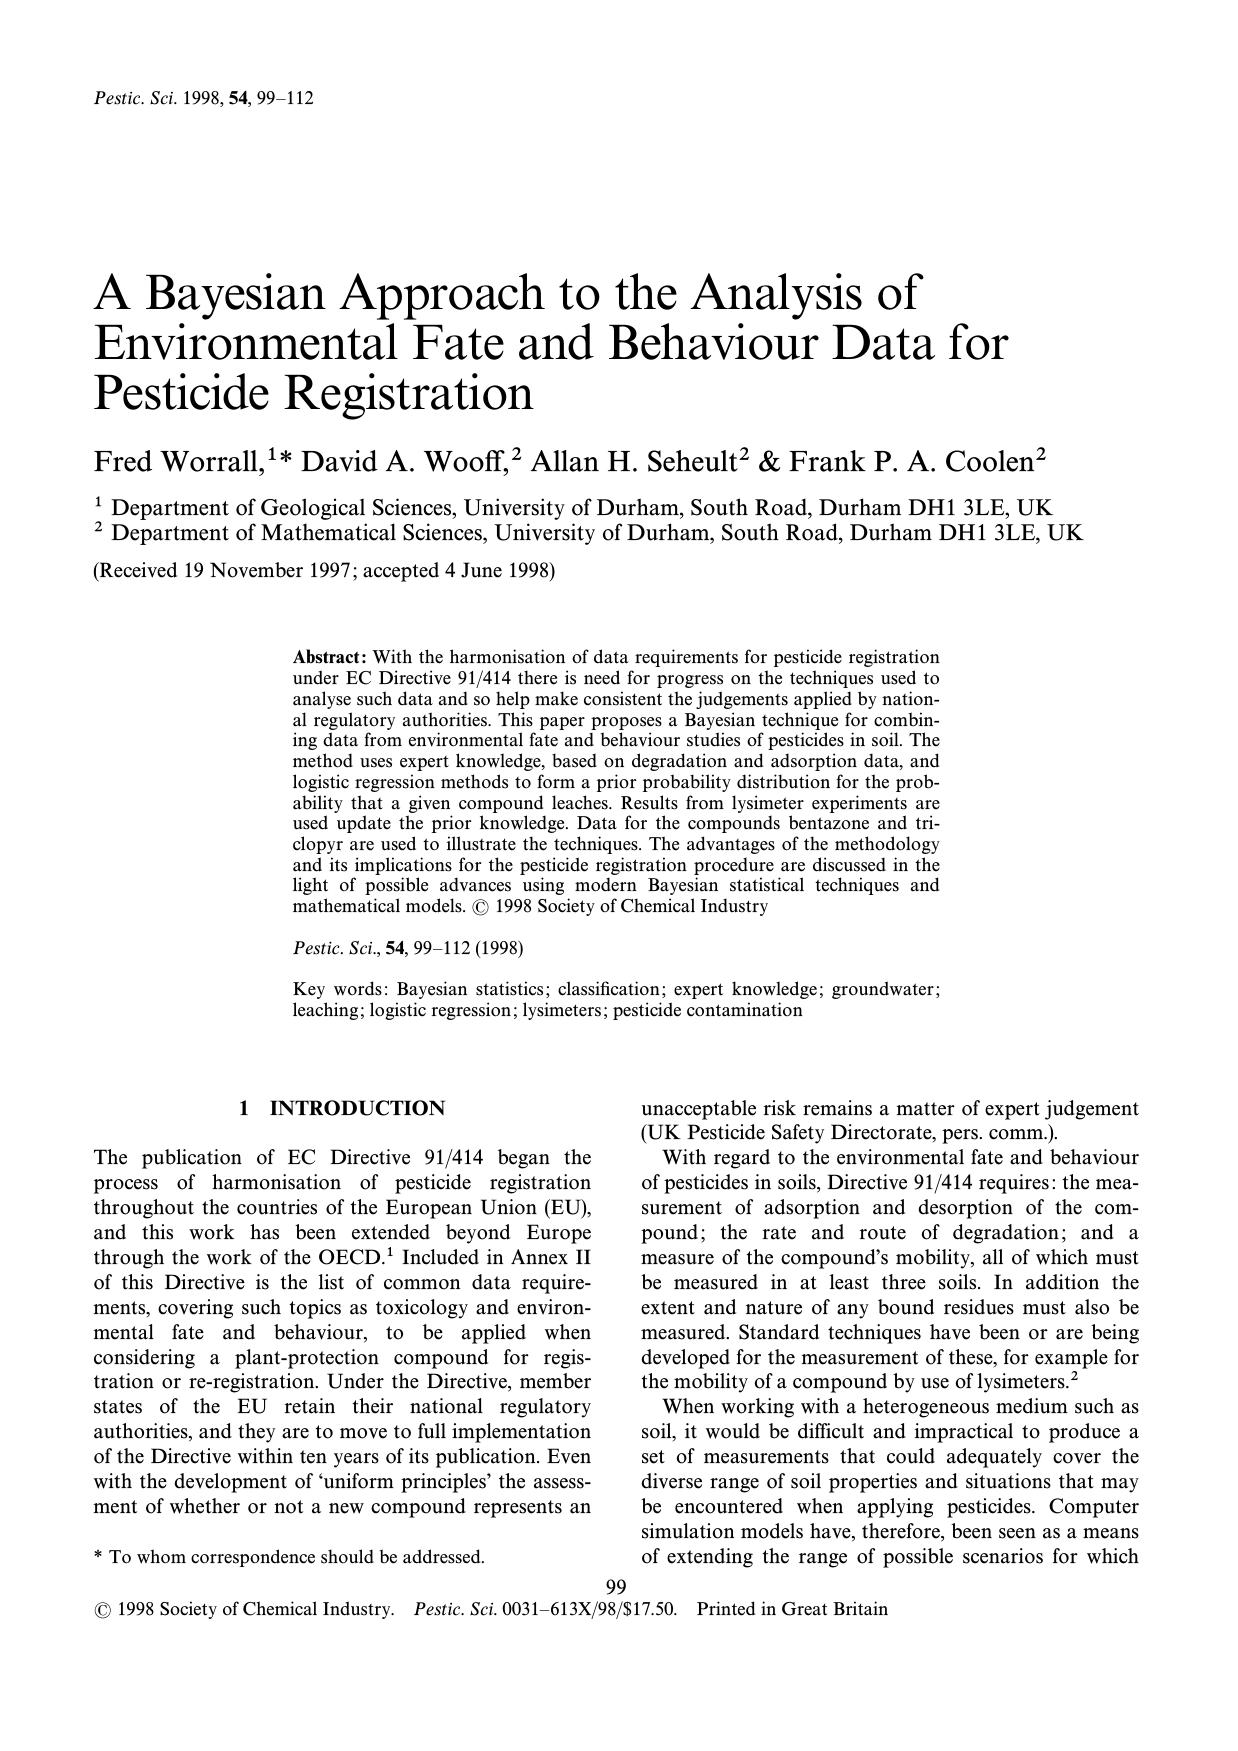 A Bayesian approach to the analysis of environmental fate and behaviour data for pesticide registration by Worrall Wooff Seheult Coolen